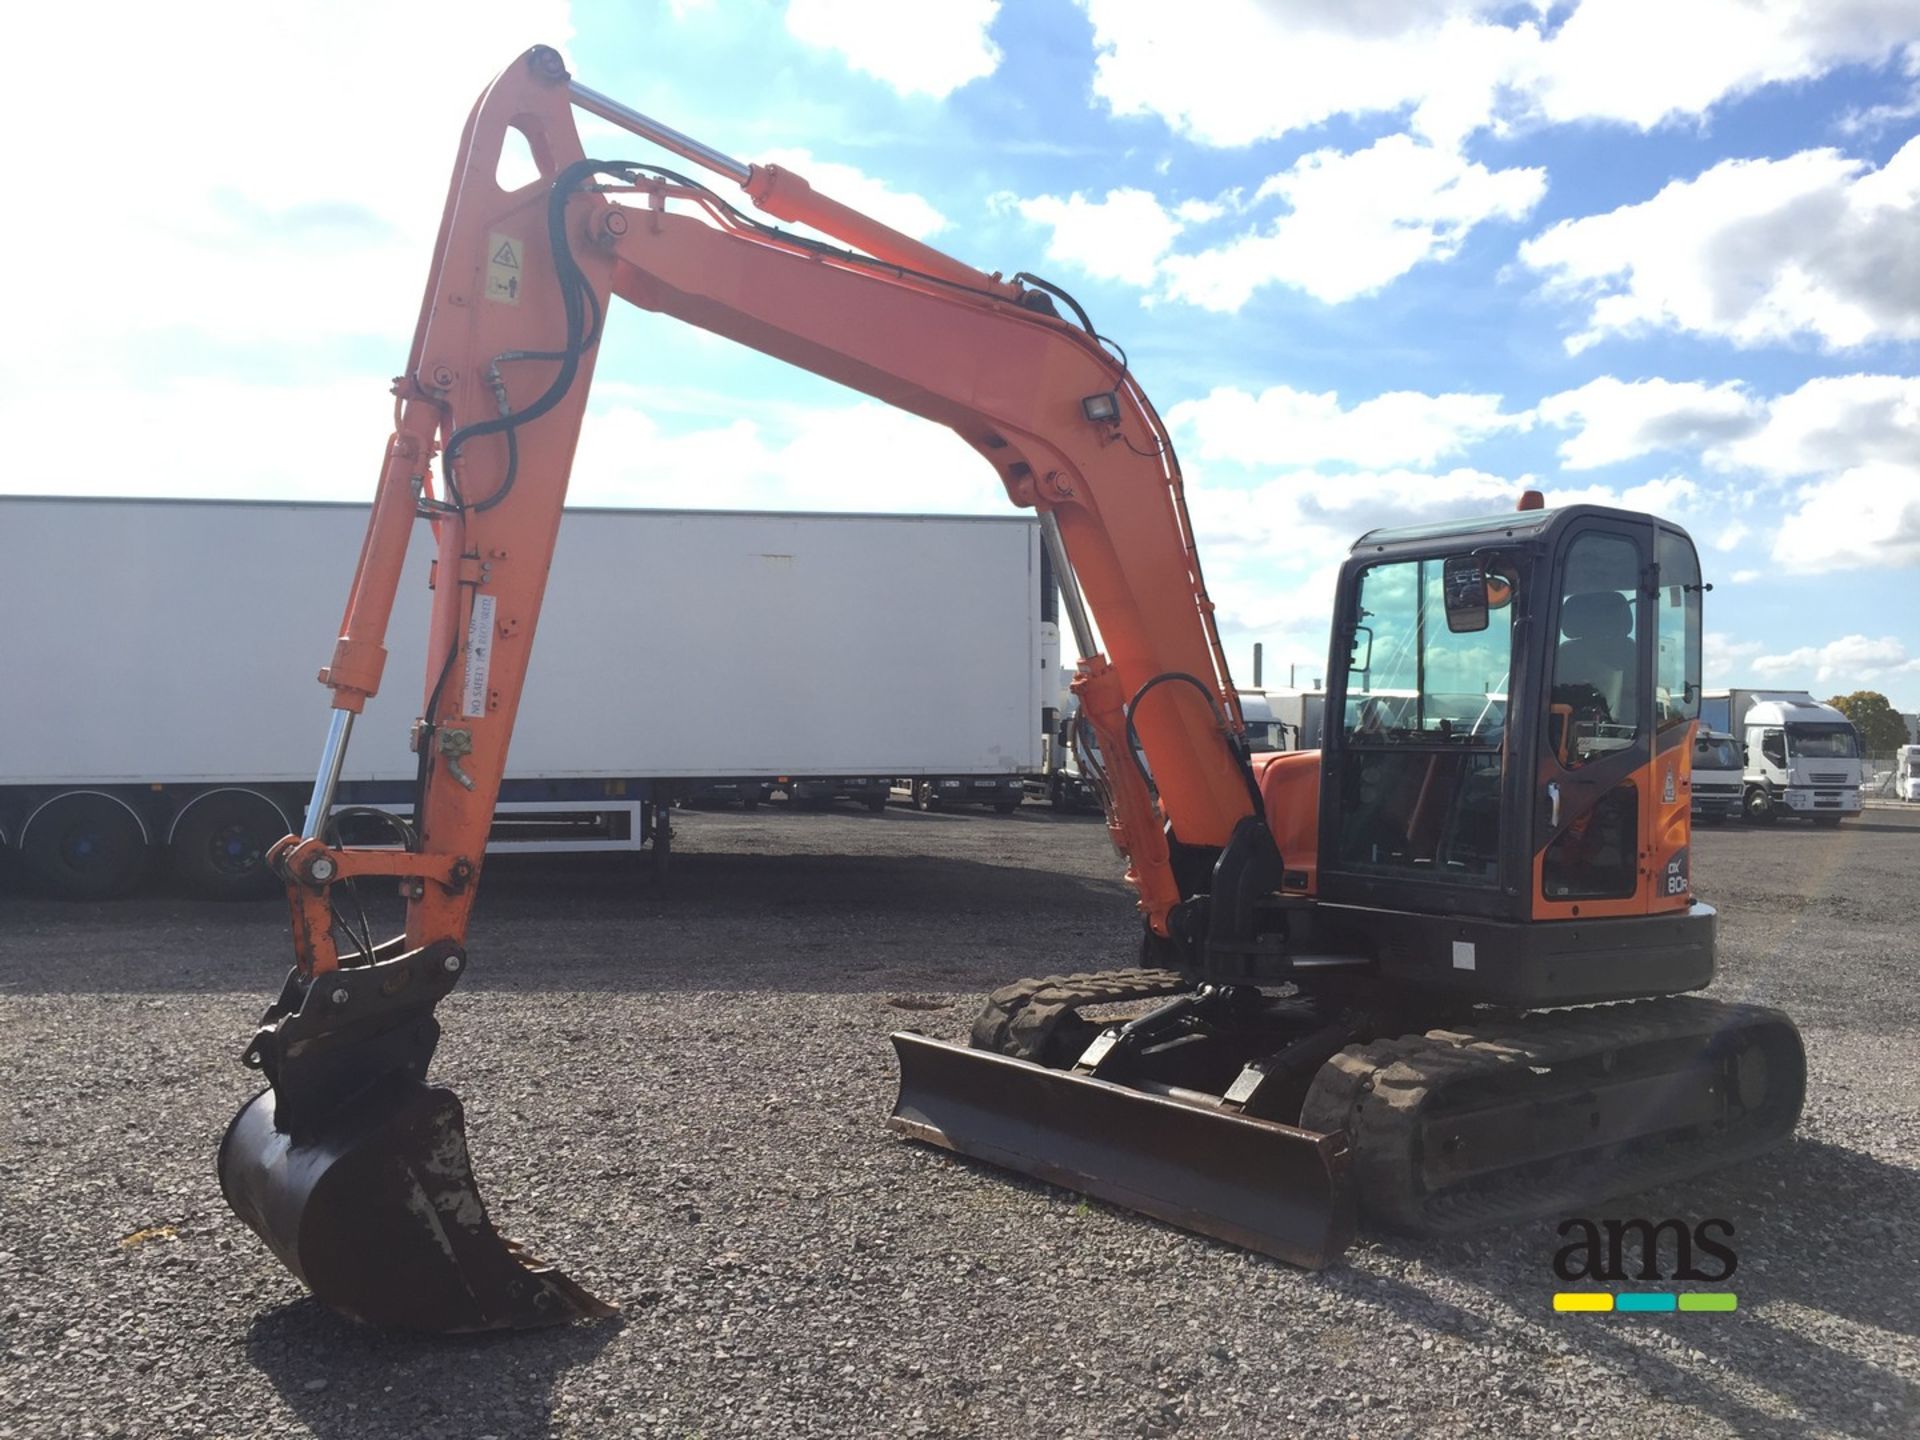 2010, Doosan DX80R Excavator Serial No. 50284, Hours 5040 approx. Cab, Rubber Track, Quick Hitch - Image 4 of 18